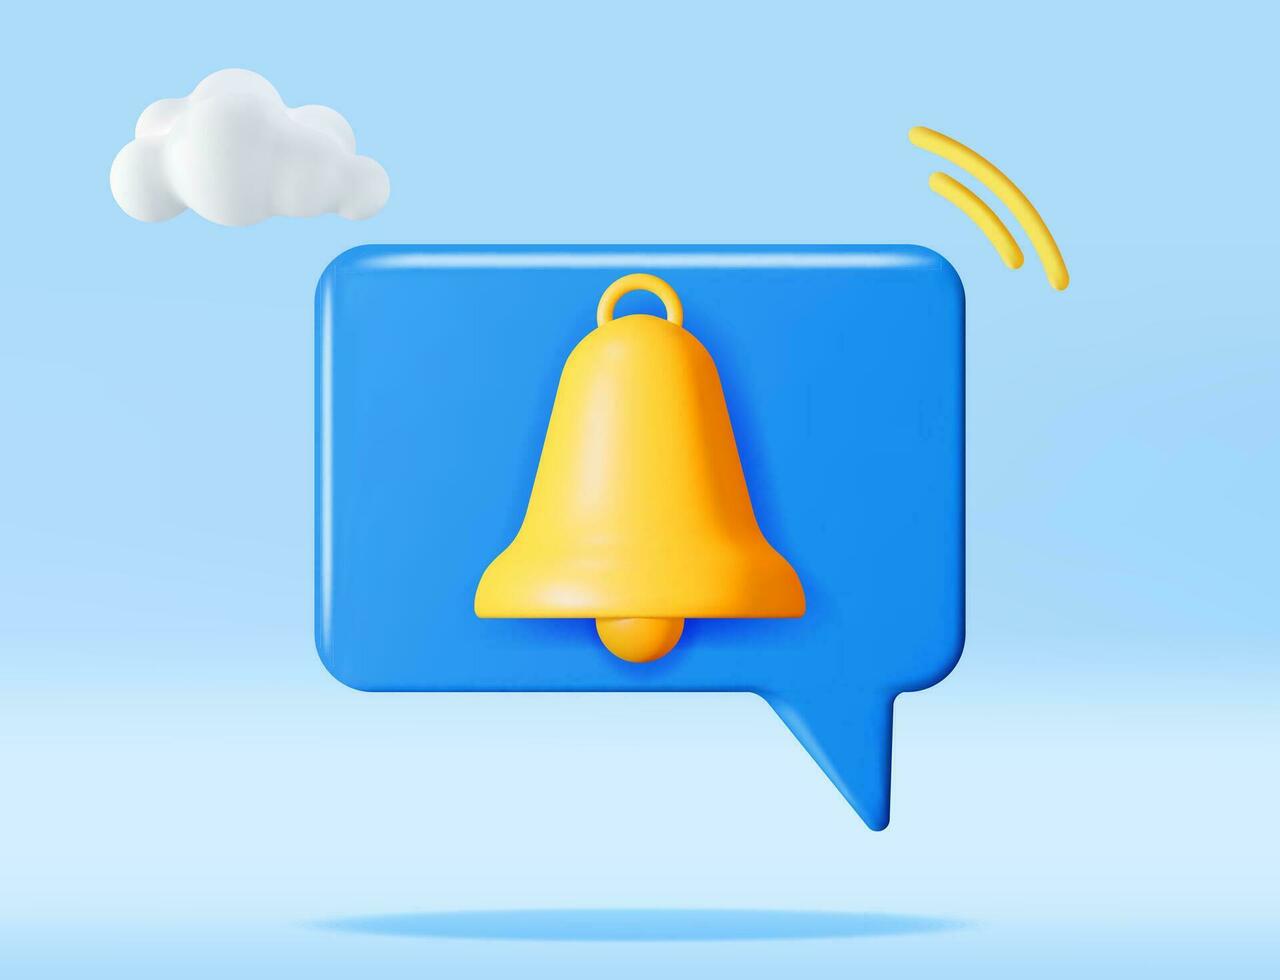 3D Notification Bubble with Bell Icon. Golden Render Ringing Bell. Gold School Bell and Chat Cloud Mockup. Alert and Alarm Symbol. Social Media Network Notification Reminder. Vector Illustration